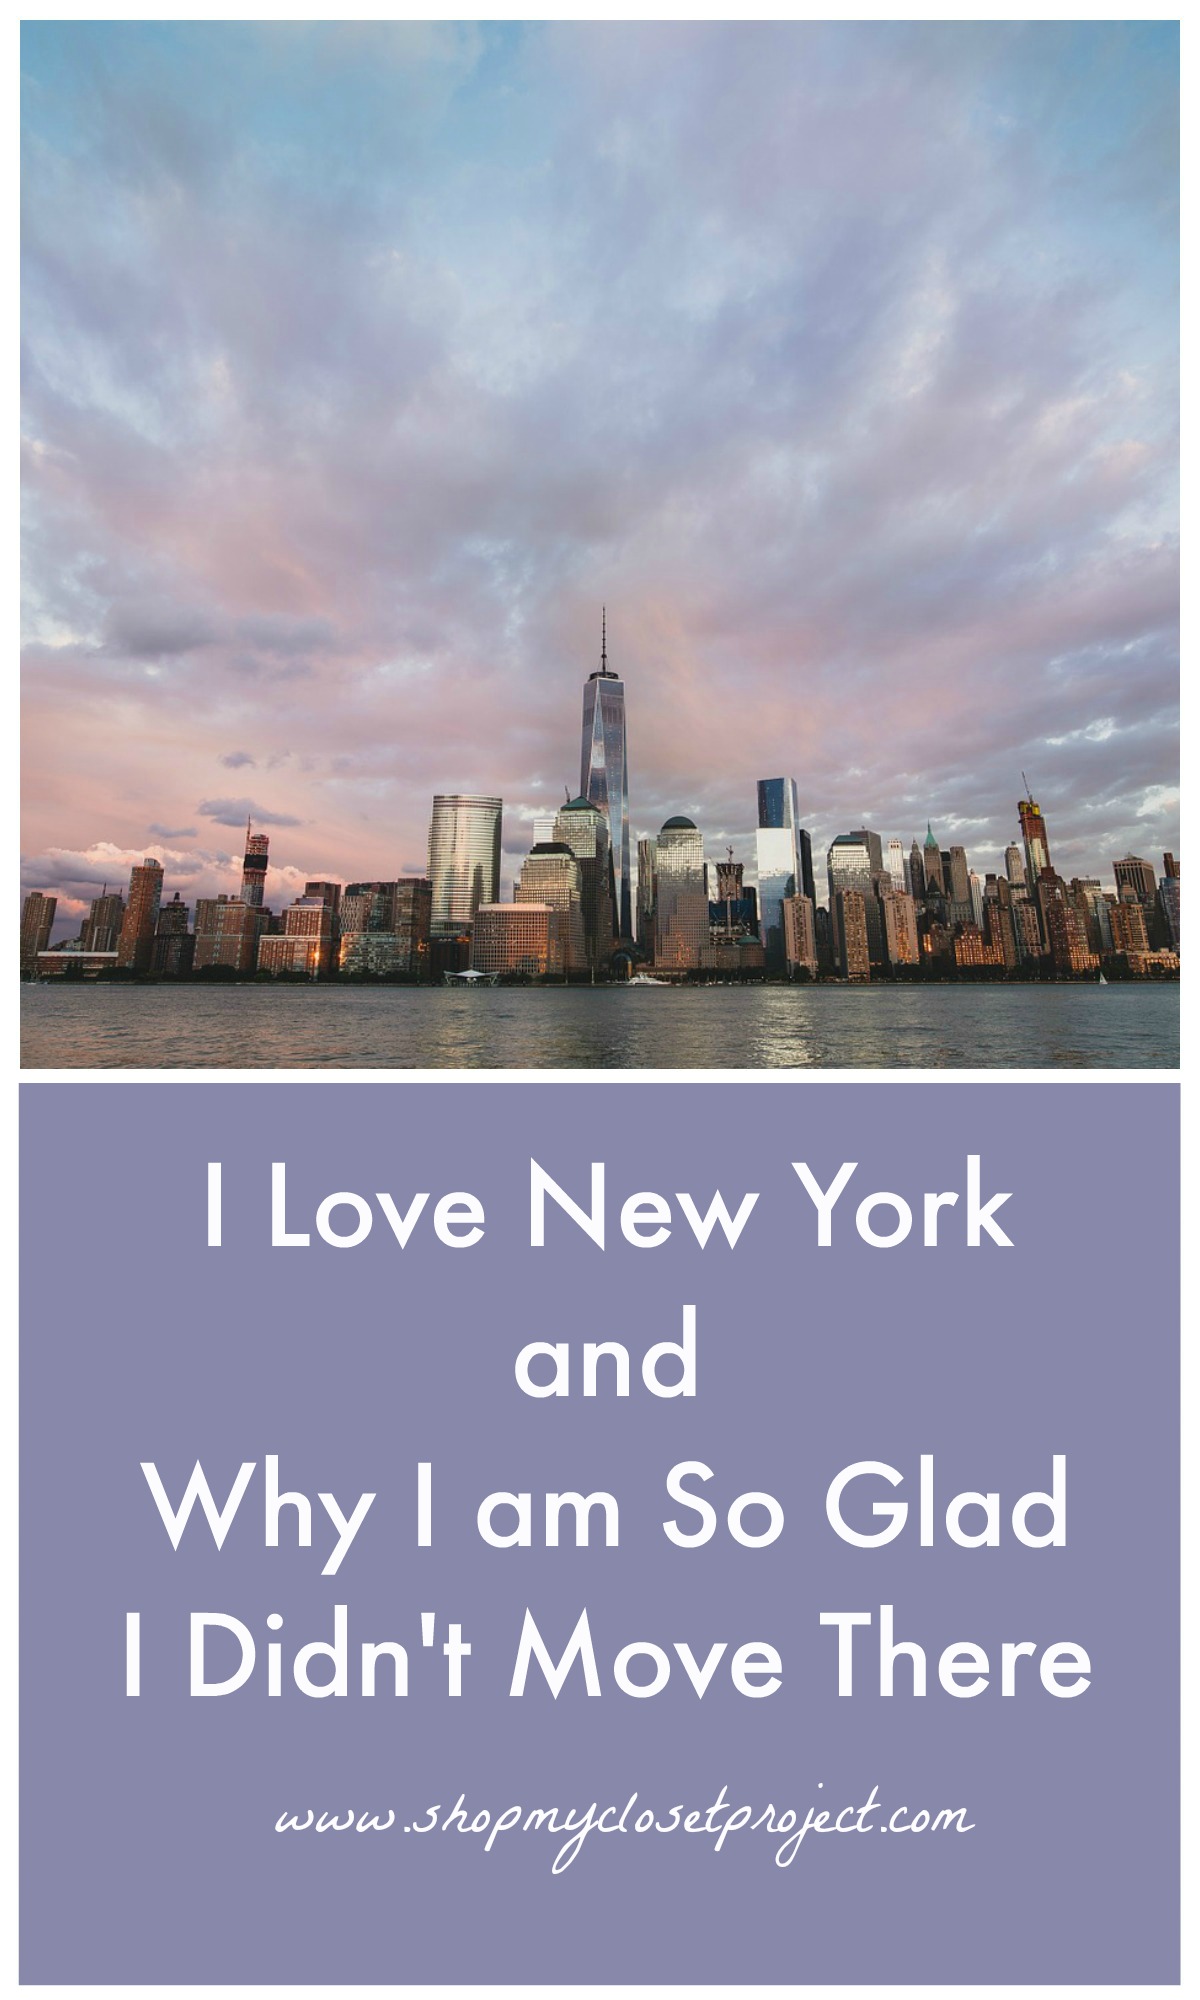 I Love New York and Why I am So Glad I Didn’t Move There